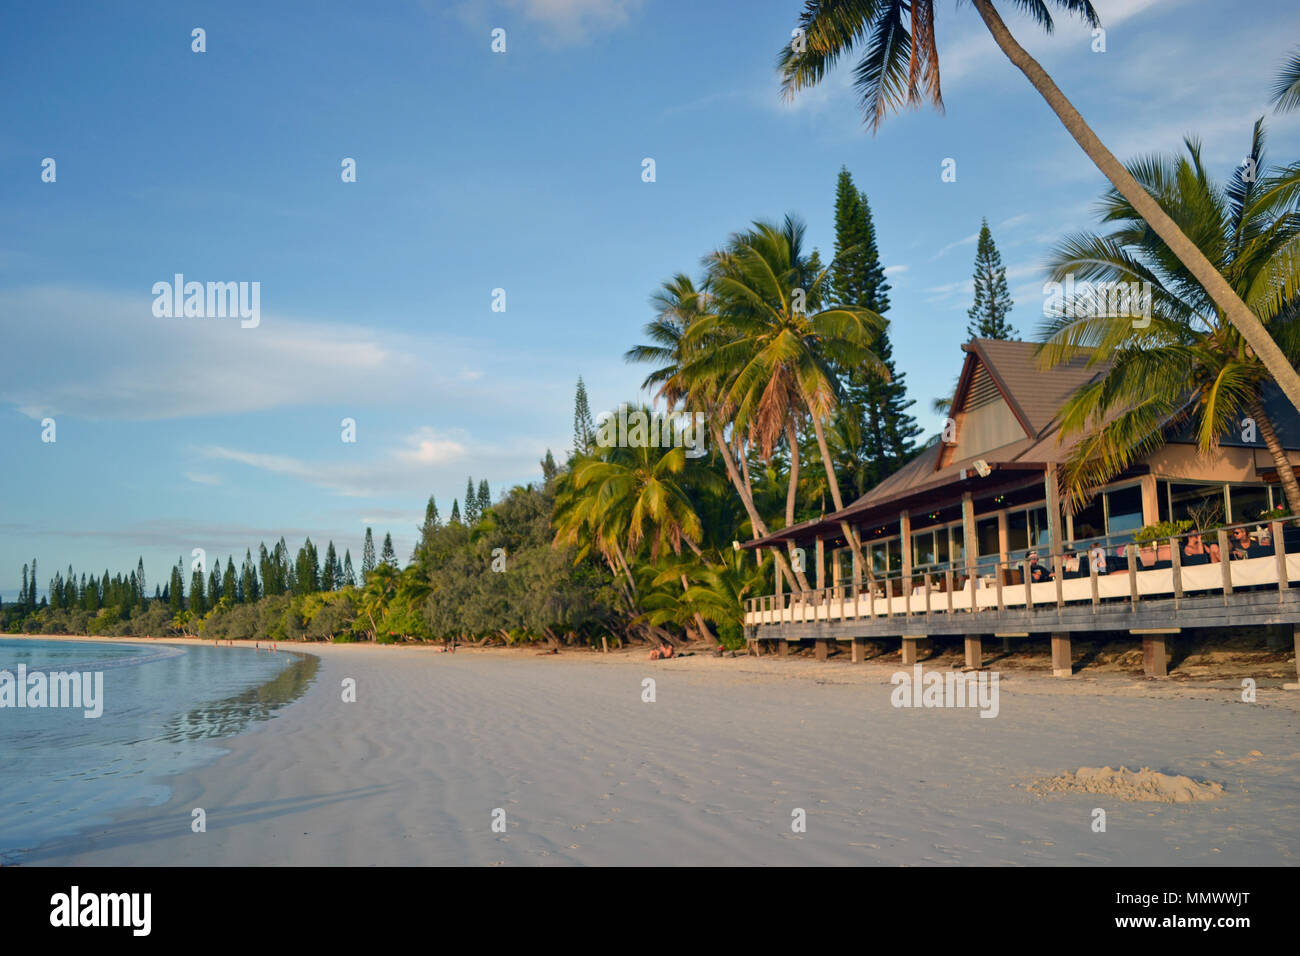 Beachfront restaurant at a hotel in Kuto Bay, Isle of Pines, New Caledonia, South Pacific Stock Photo